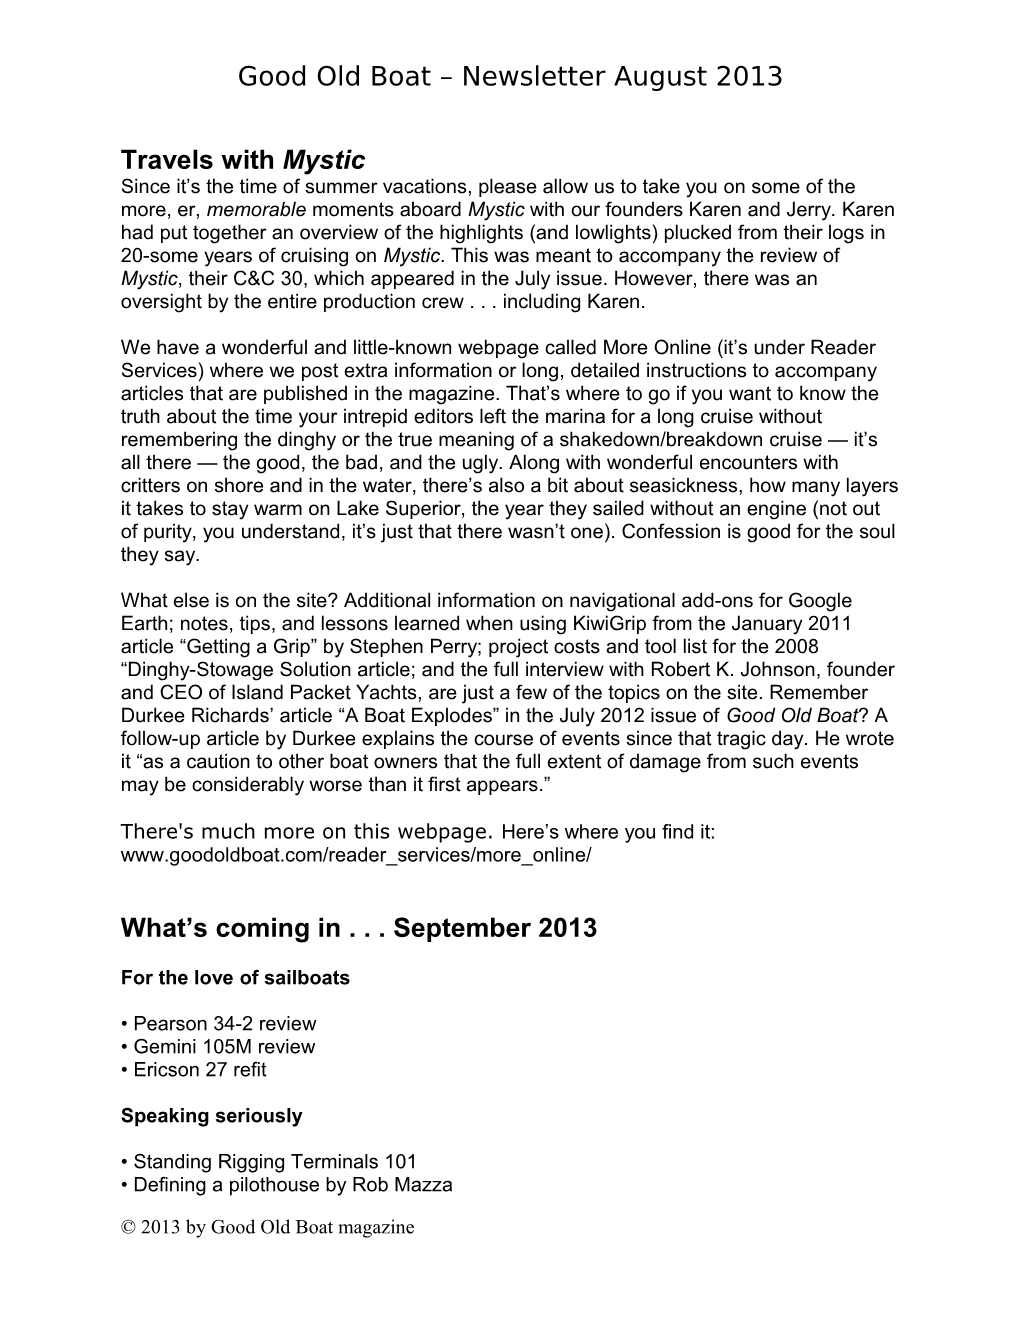 Good Old Boat Newsletter August 2013 Page 1